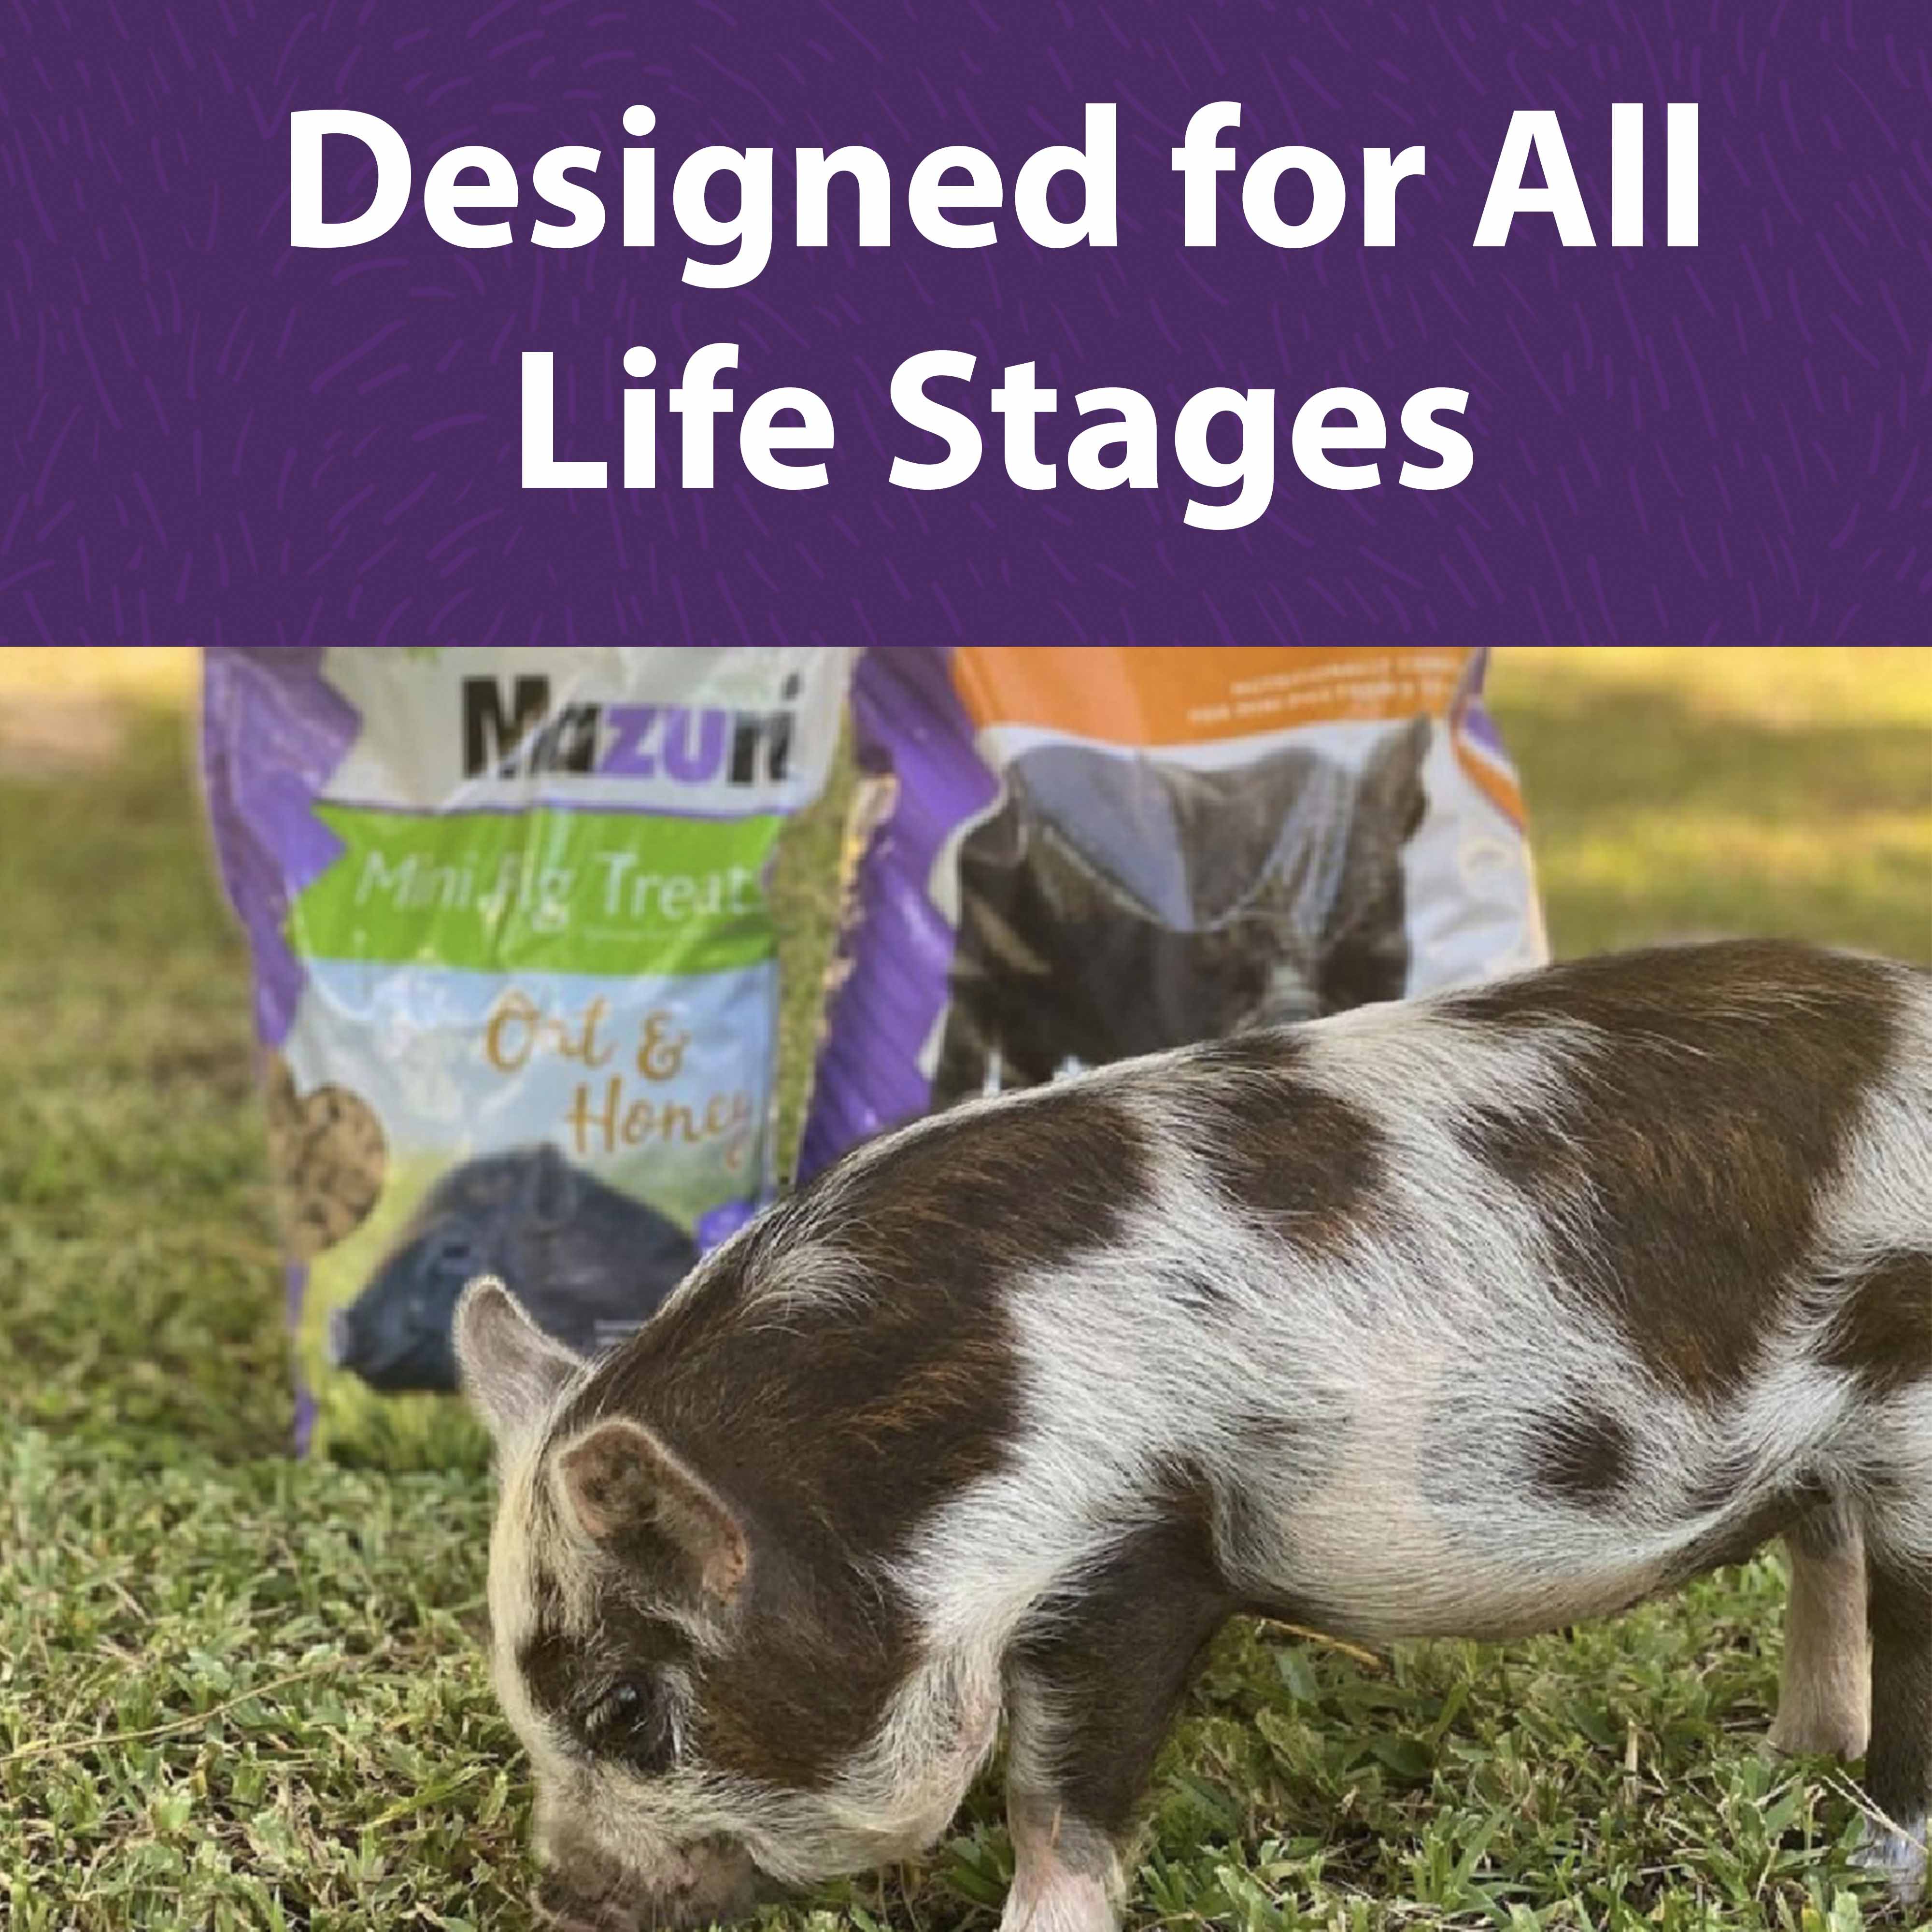 Mini Pig treats are designed for all life stages